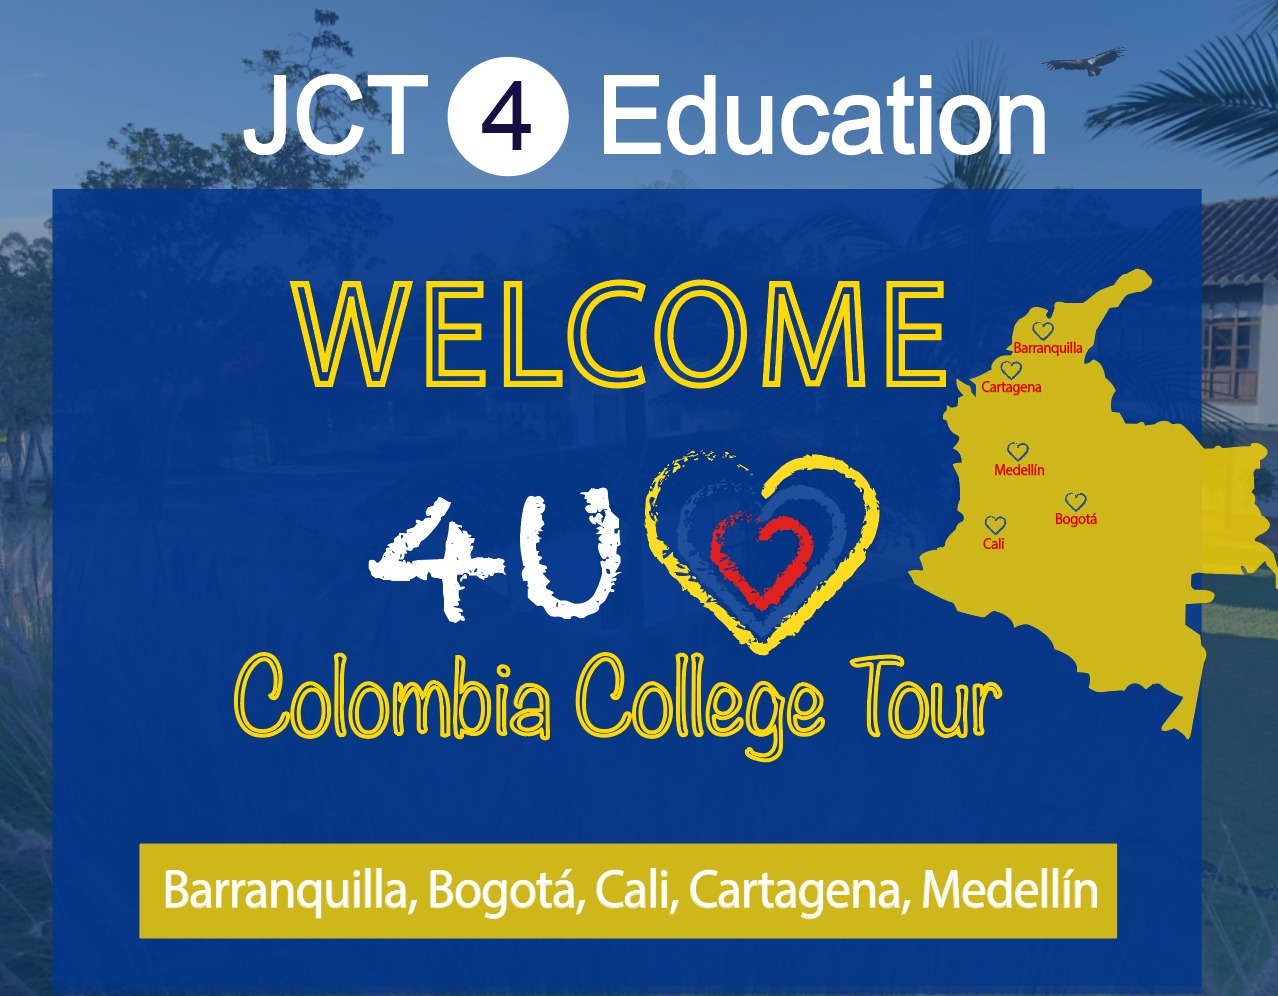 4U! Colombia College Tour Powered by JCT4Education Welcome